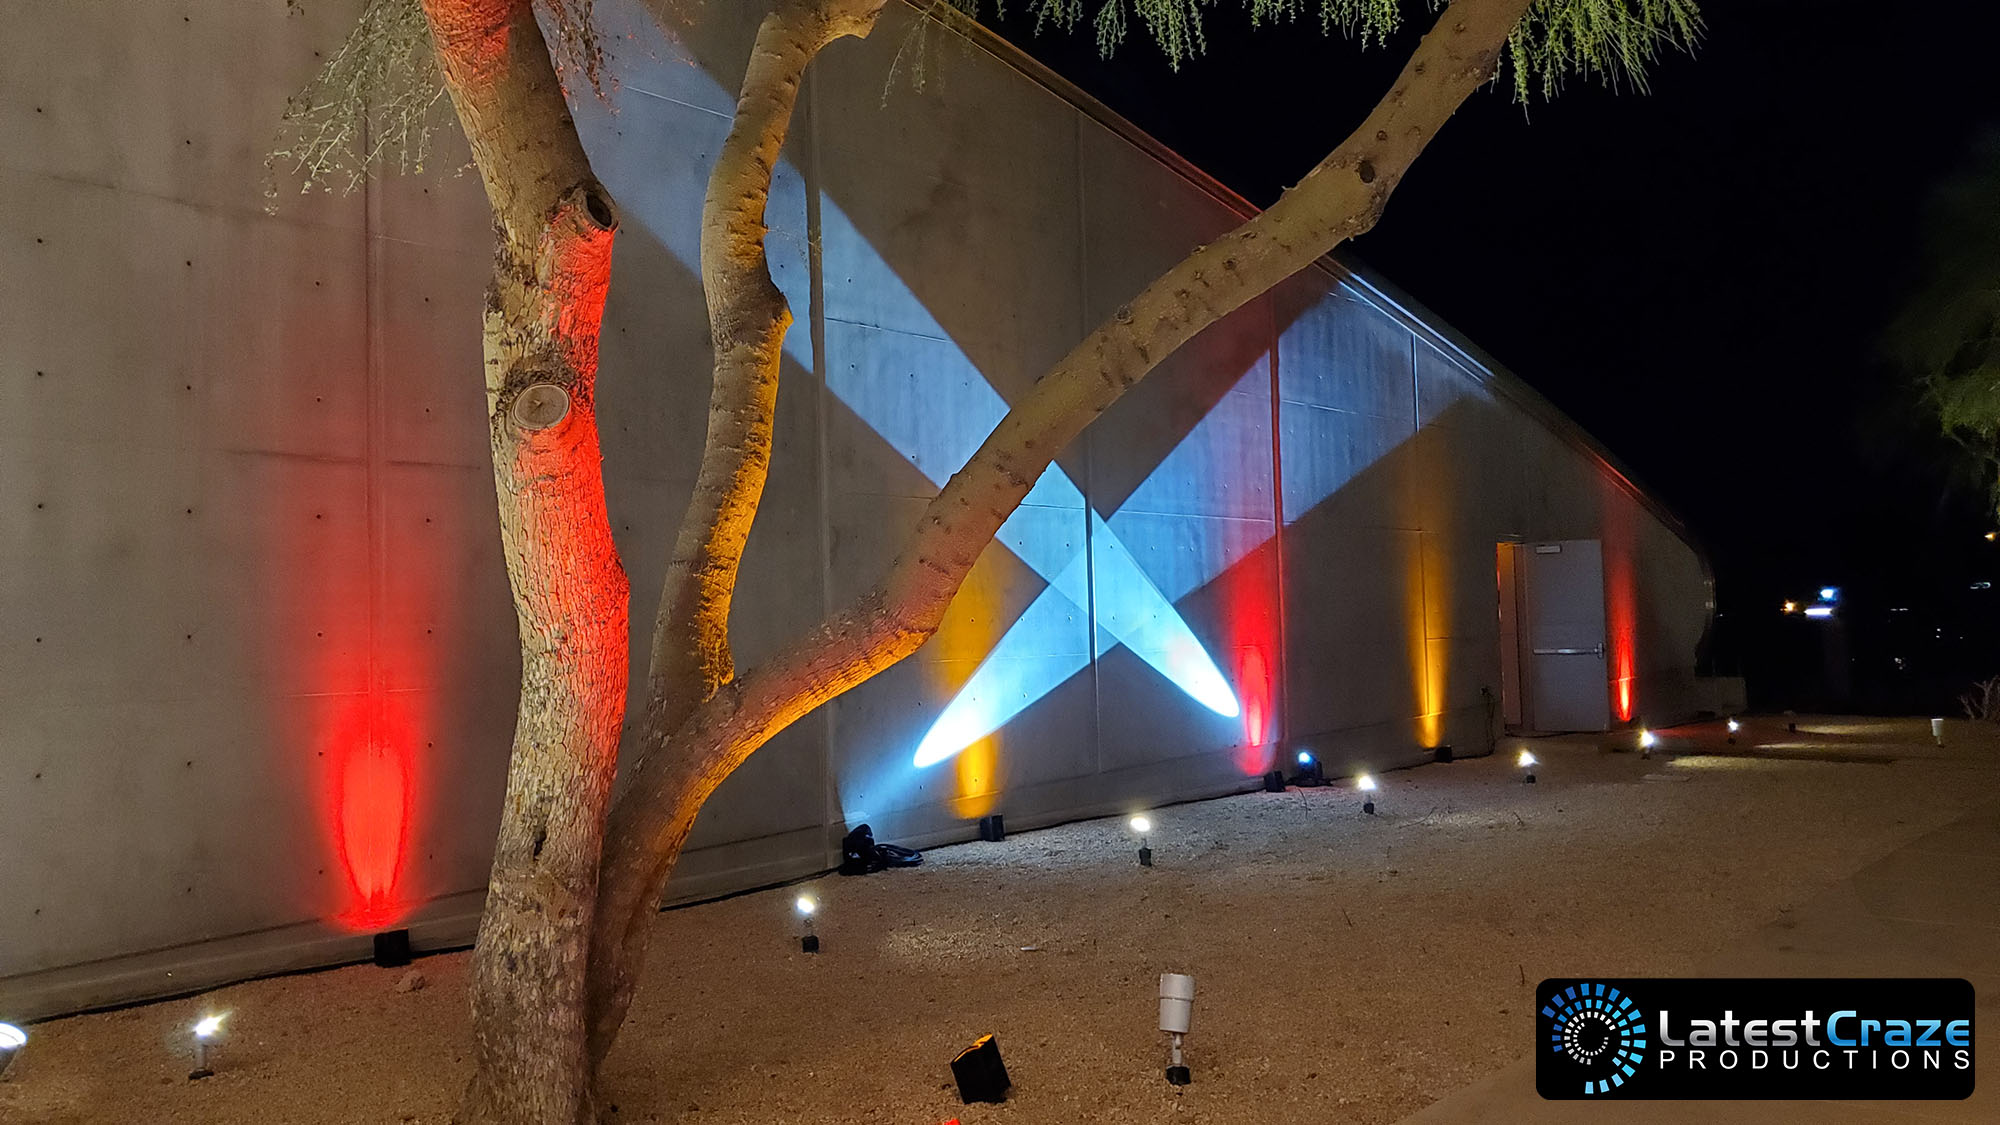 search lights on wall behind tree at entrance hangar one latest craze productions 030723